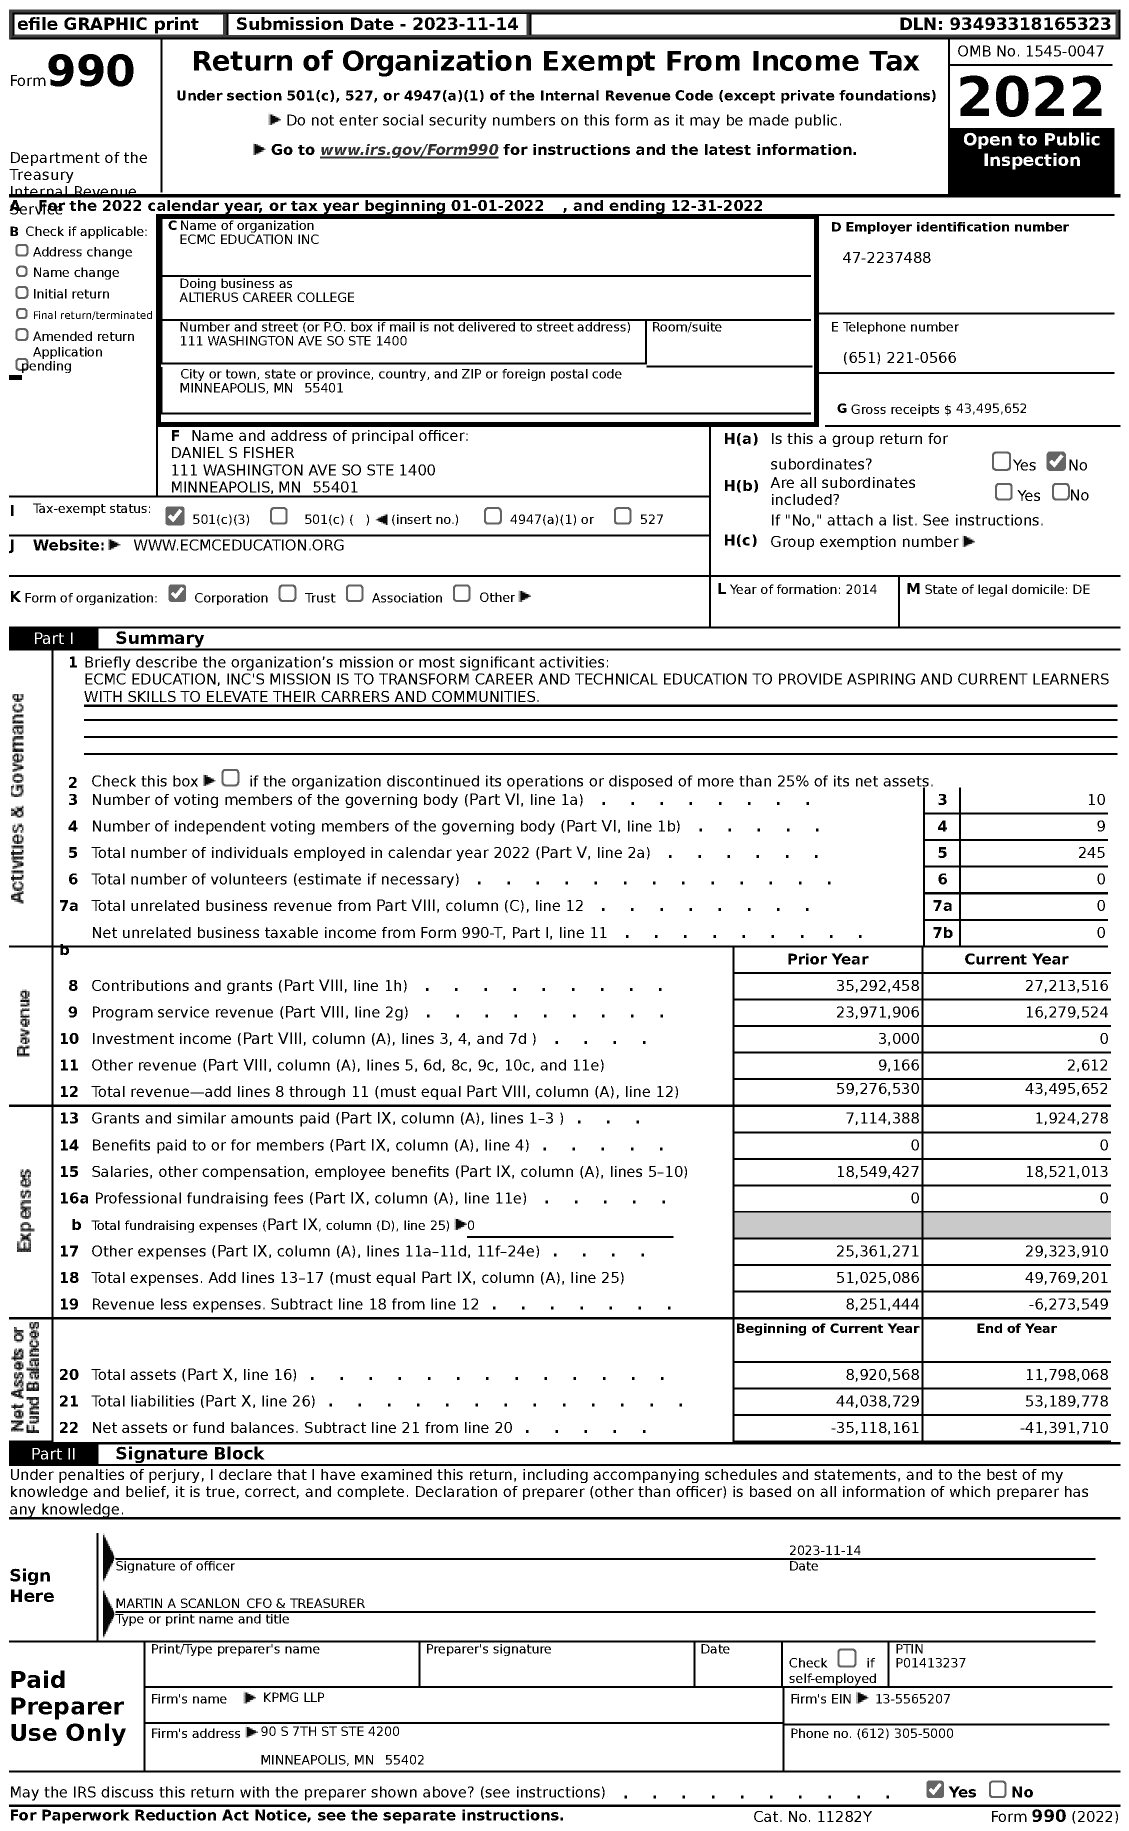 Image of first page of 2022 Form 990 for Altierus Career College